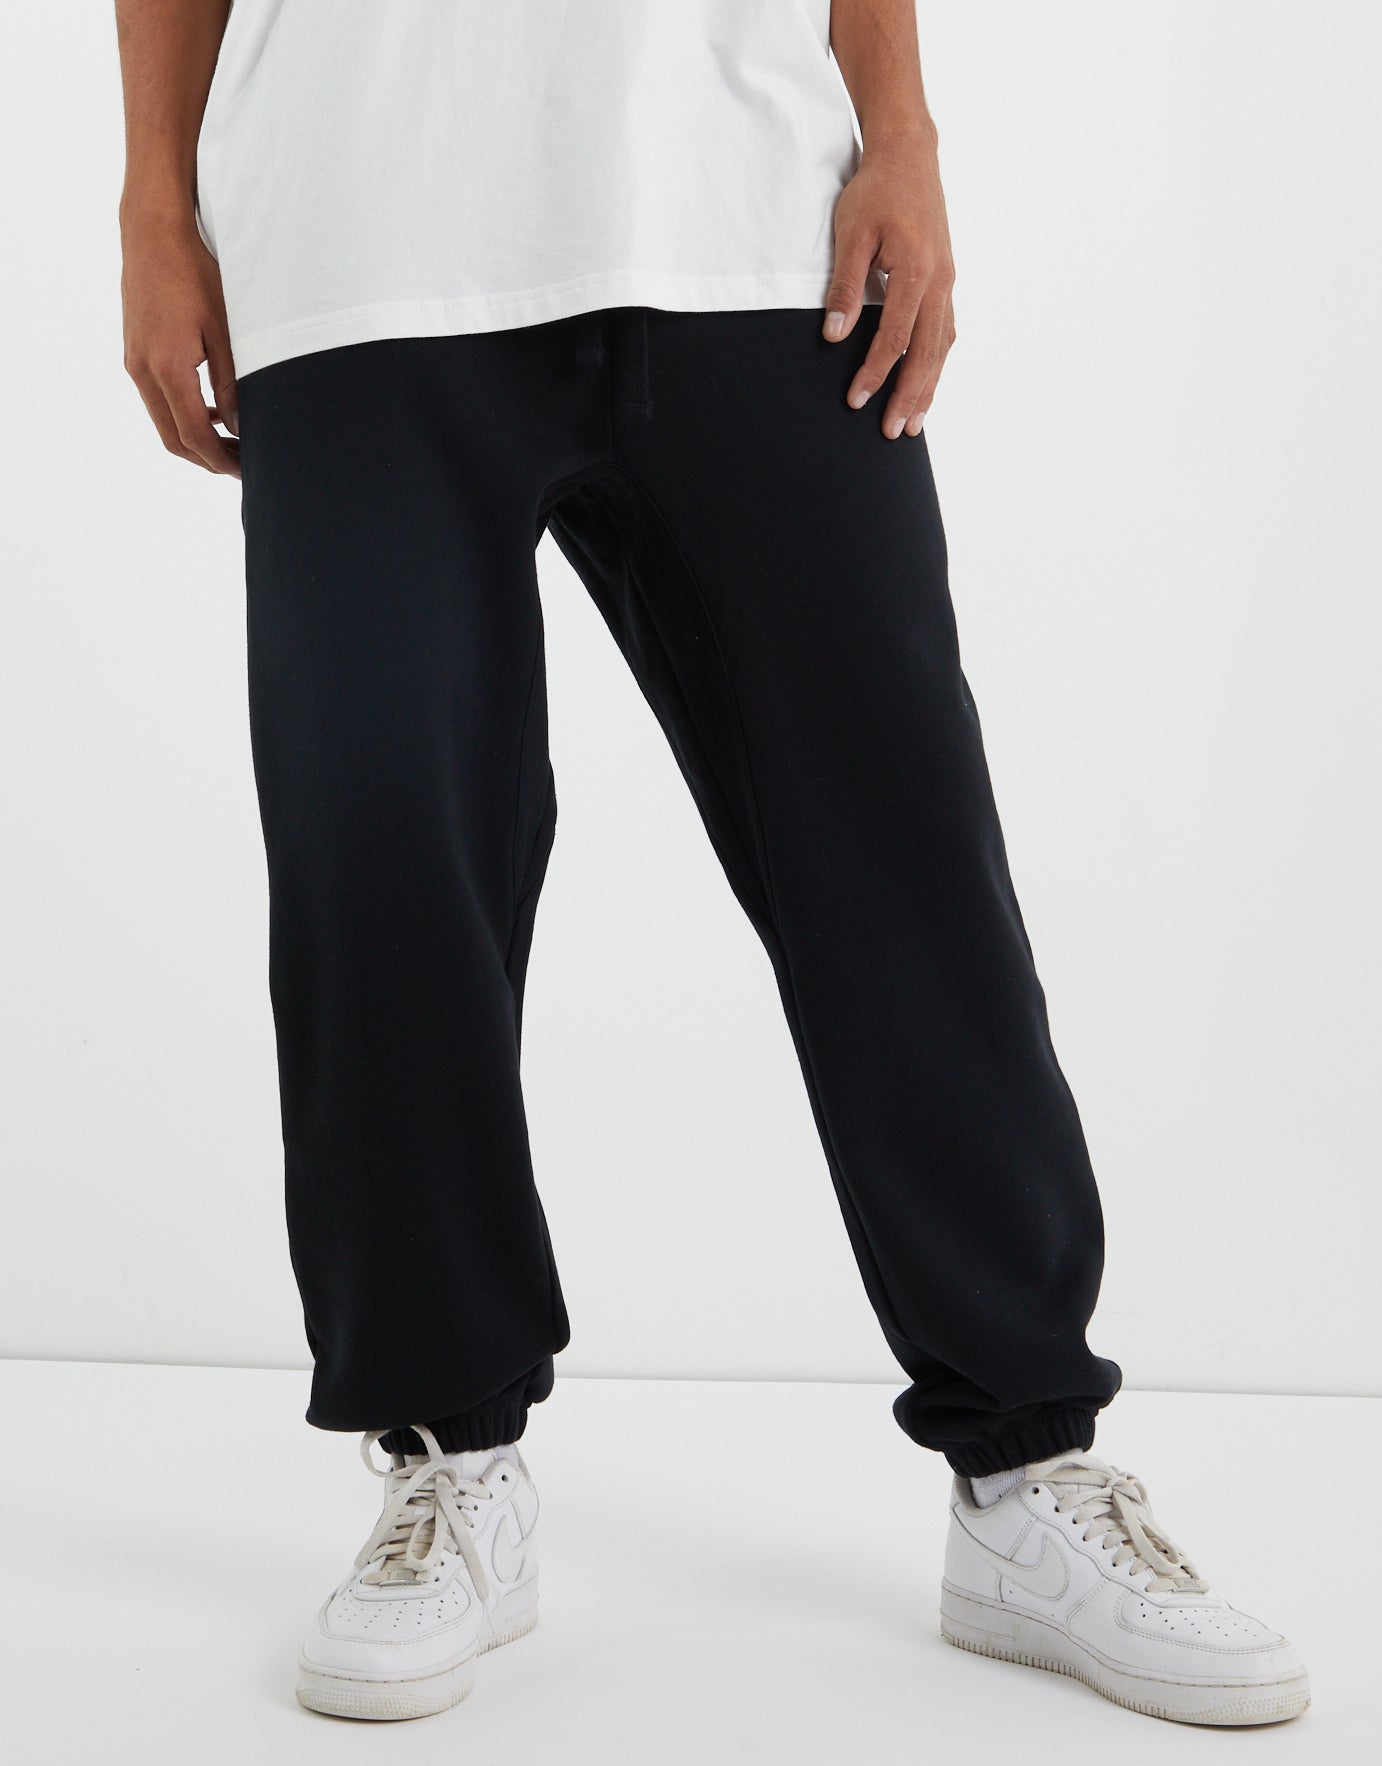 Big Button Cotton Blend Regular Fit Trackpants for Men (Charcoal, Medium) :  Amazon.in: Clothing & Accessories